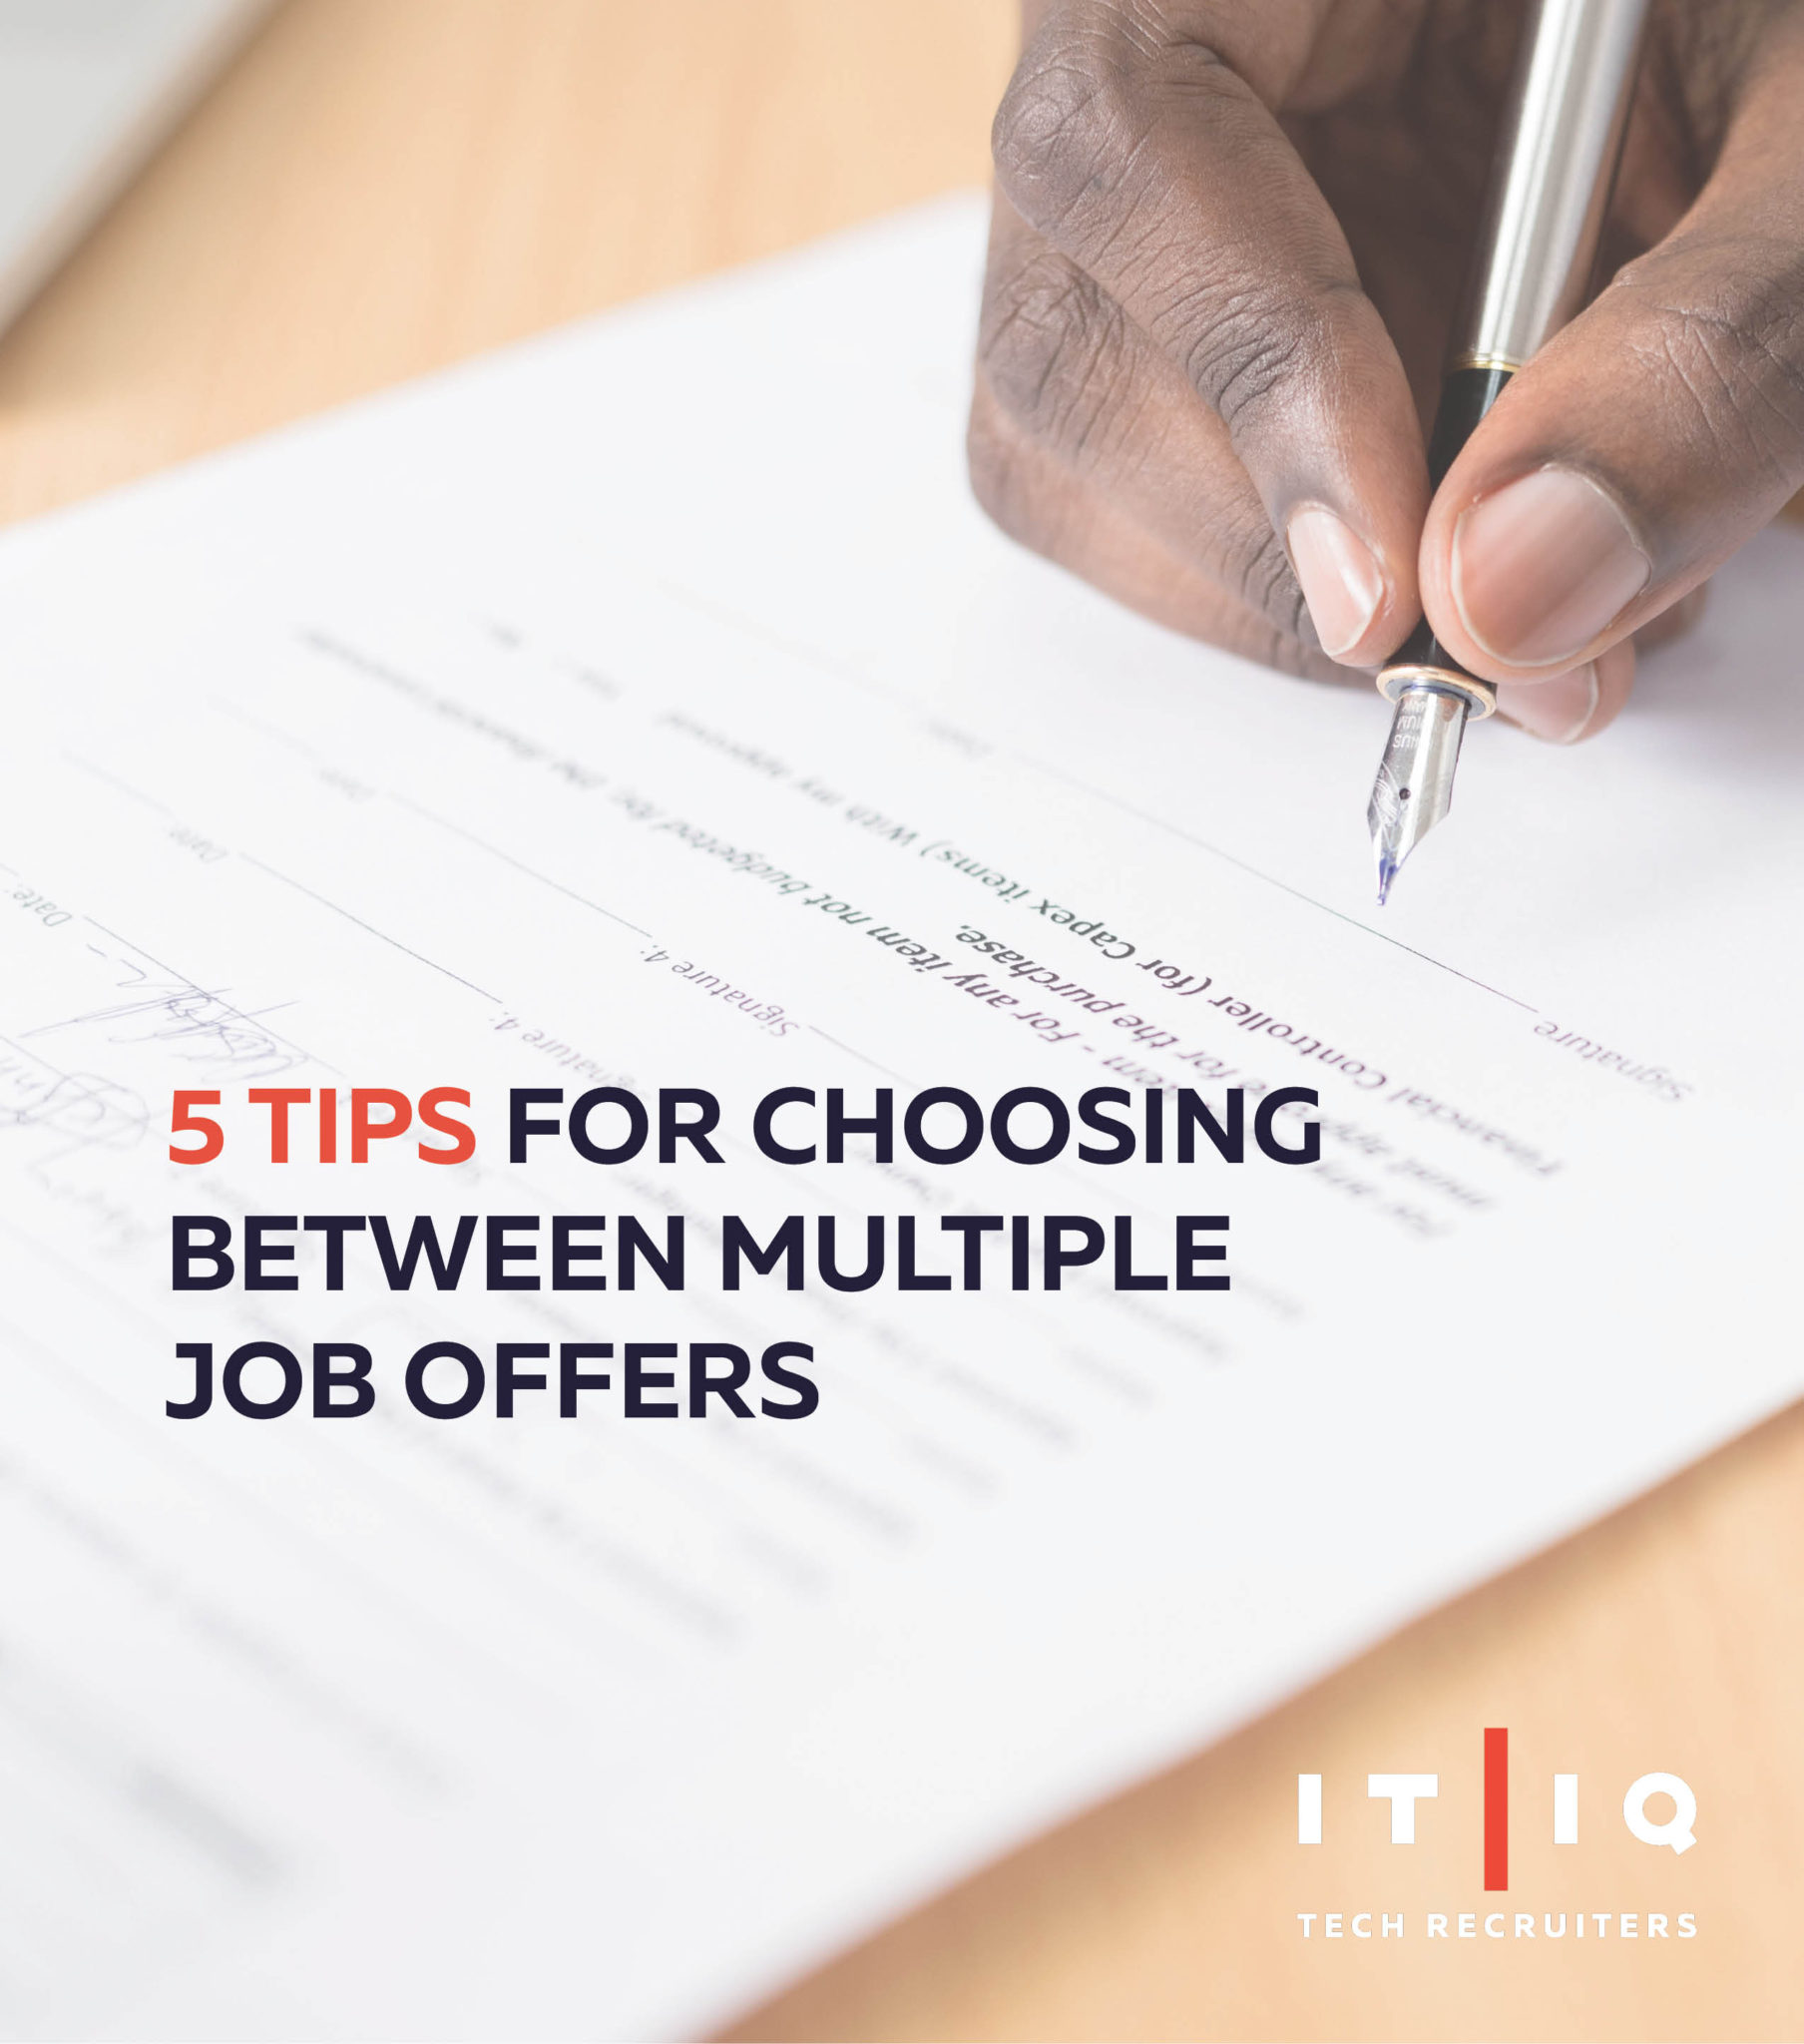 IT/IQ Tech Recruiters 5 tips for choosing between multiple job offers graphic